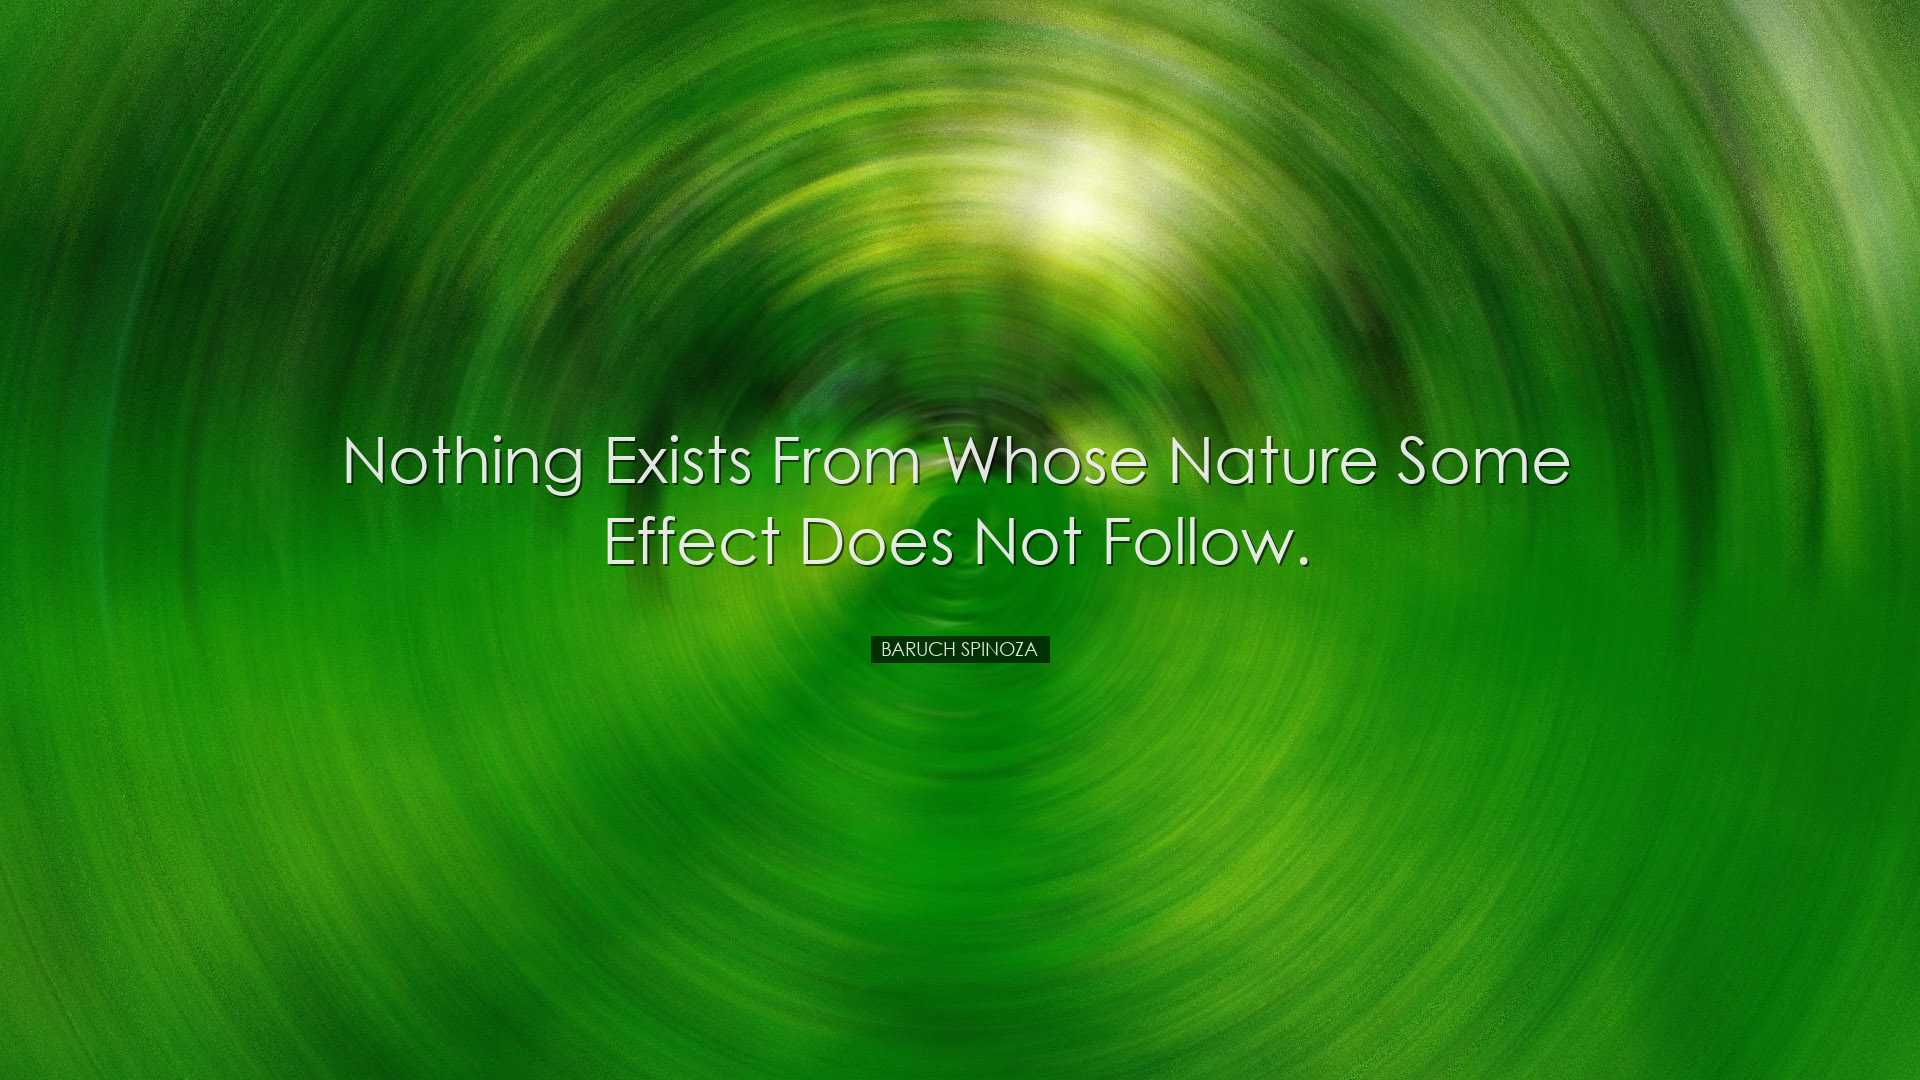 Nothing exists from whose nature some effect does not follow. - Ba